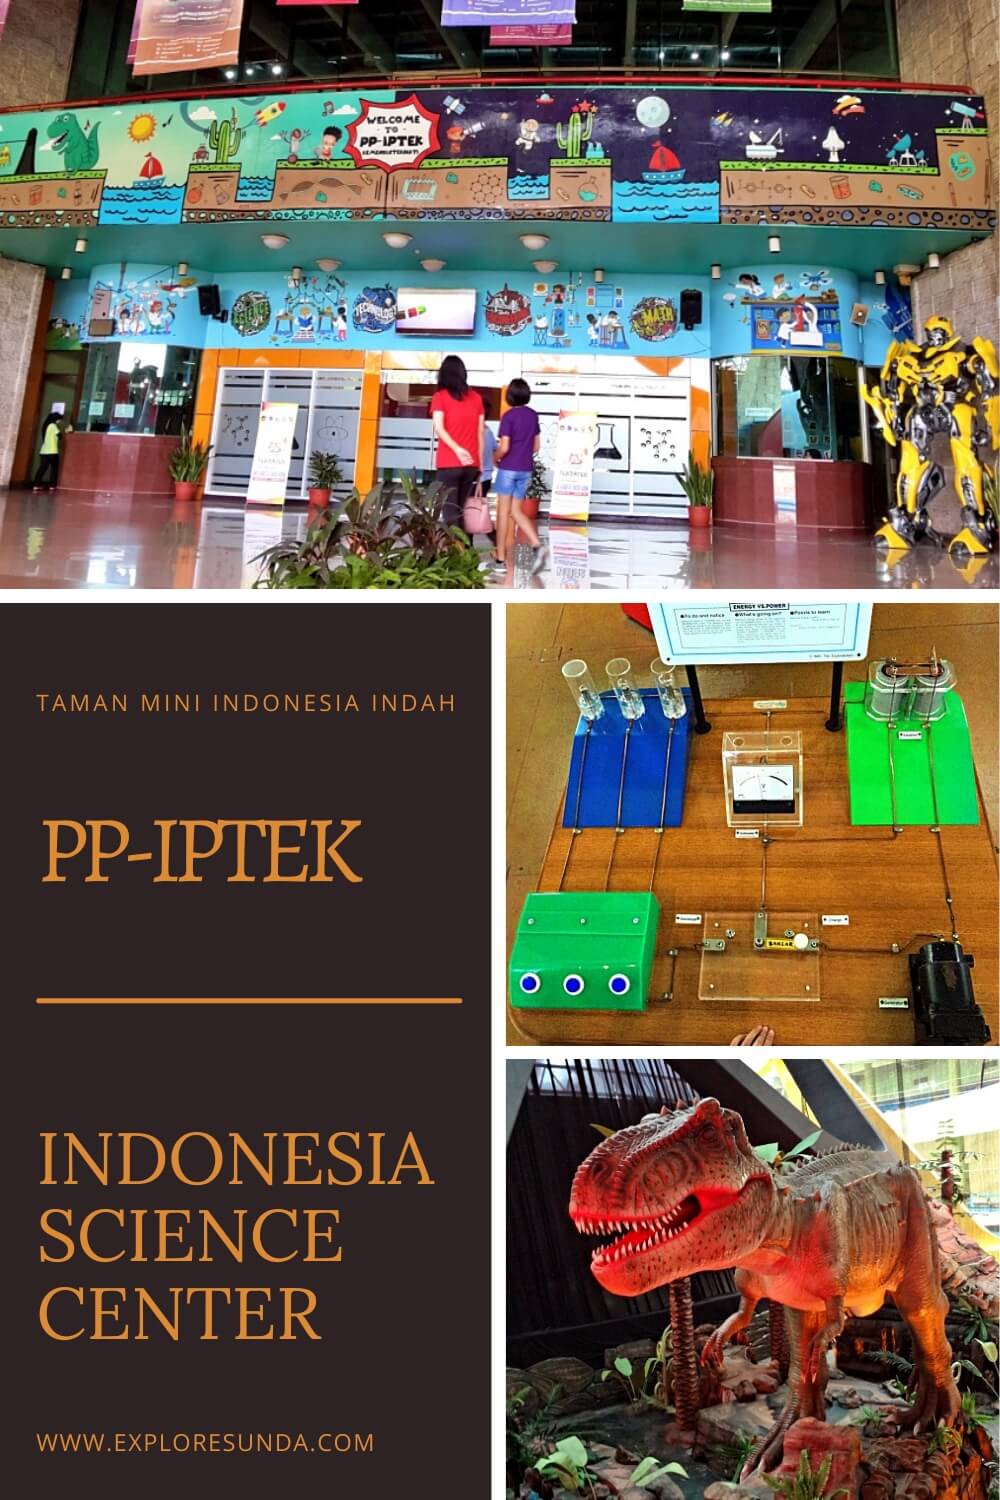 Explore PP-IPTEK, the Science Center in Taman Mini Indonesia Indah, a mix of museum and hands-on experiments to learn about science and technology.